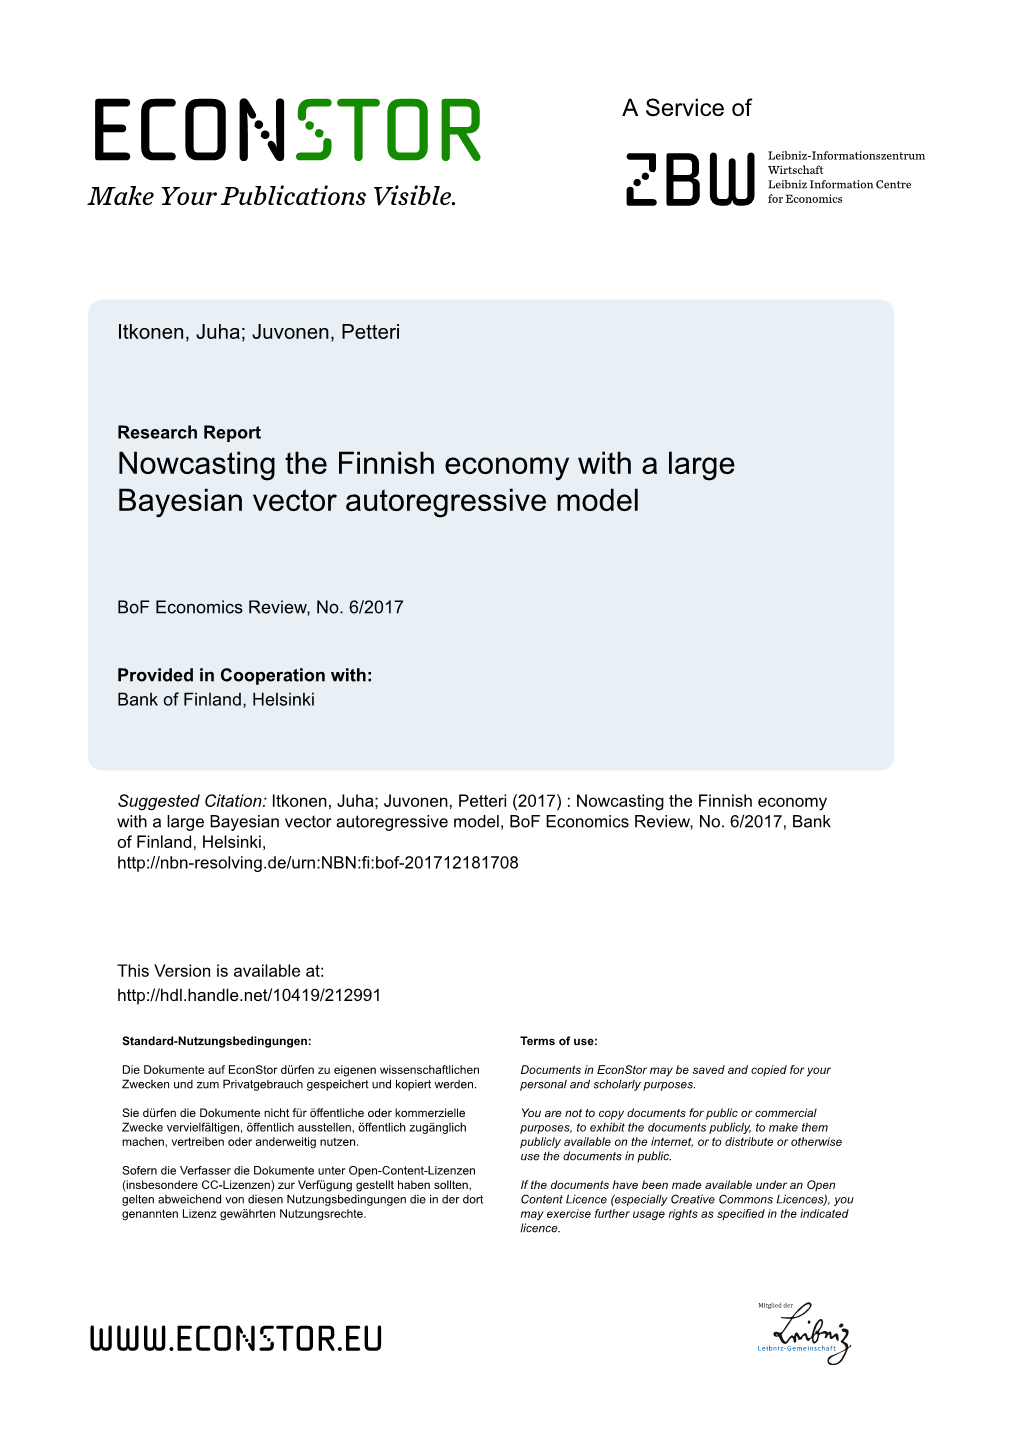 Nowcasting the Finnish Economy with a Large Bayesian Vector Autoregressive Model